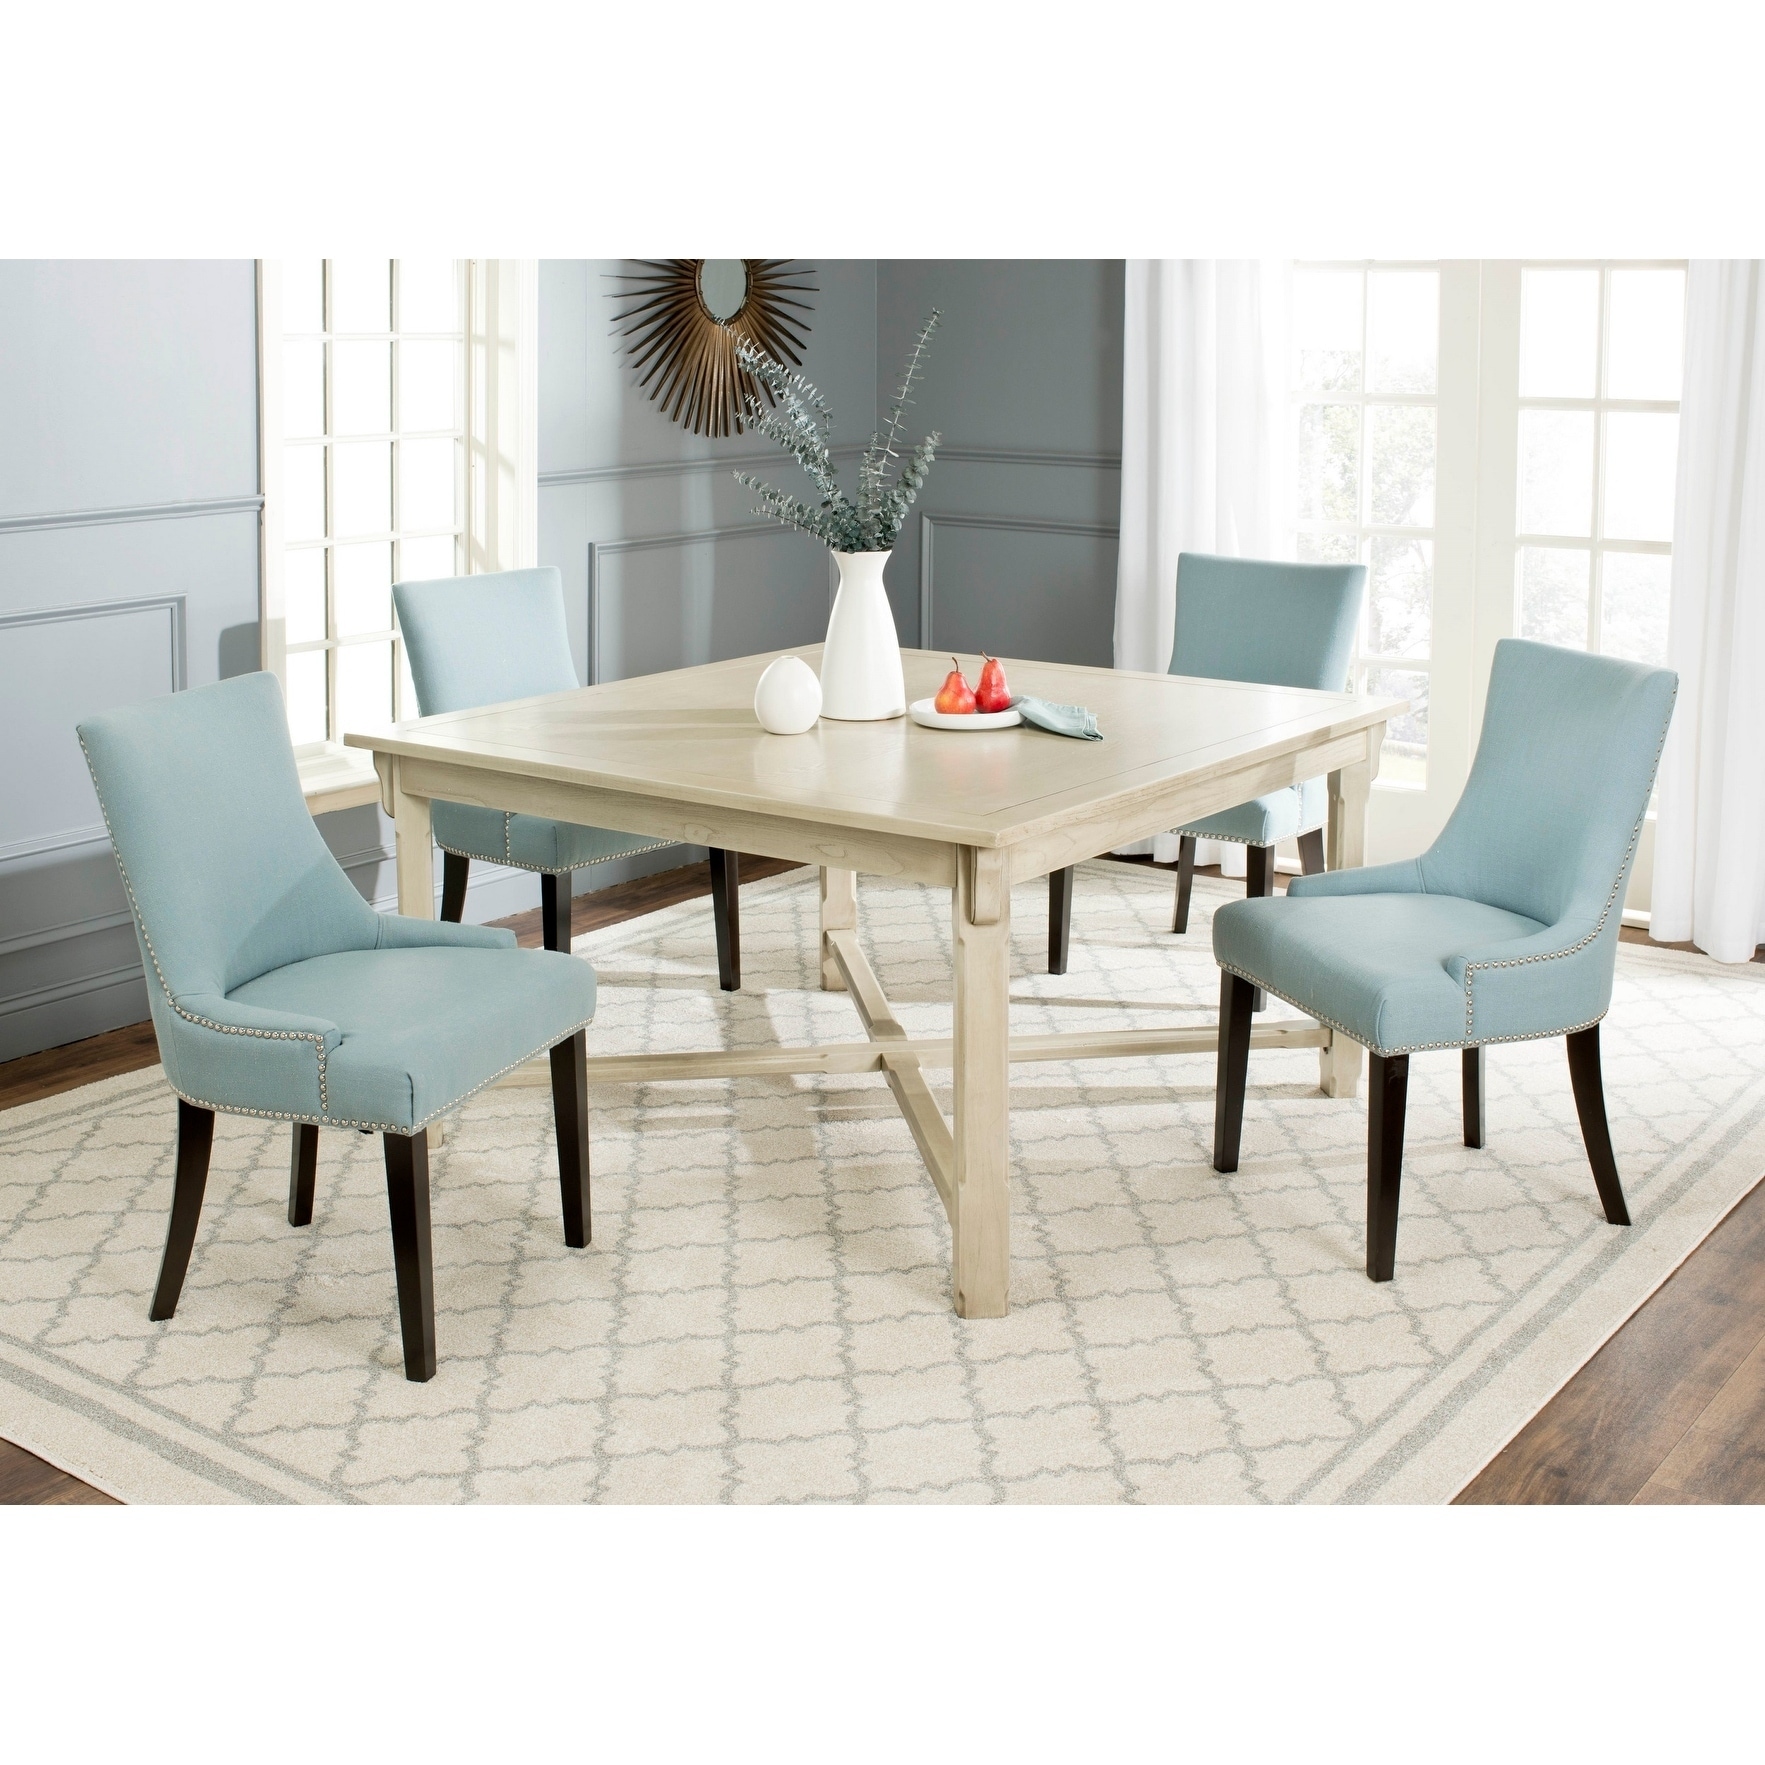 Safavieh Bleeker White Washed Dining Table 0 Overstock 9551972